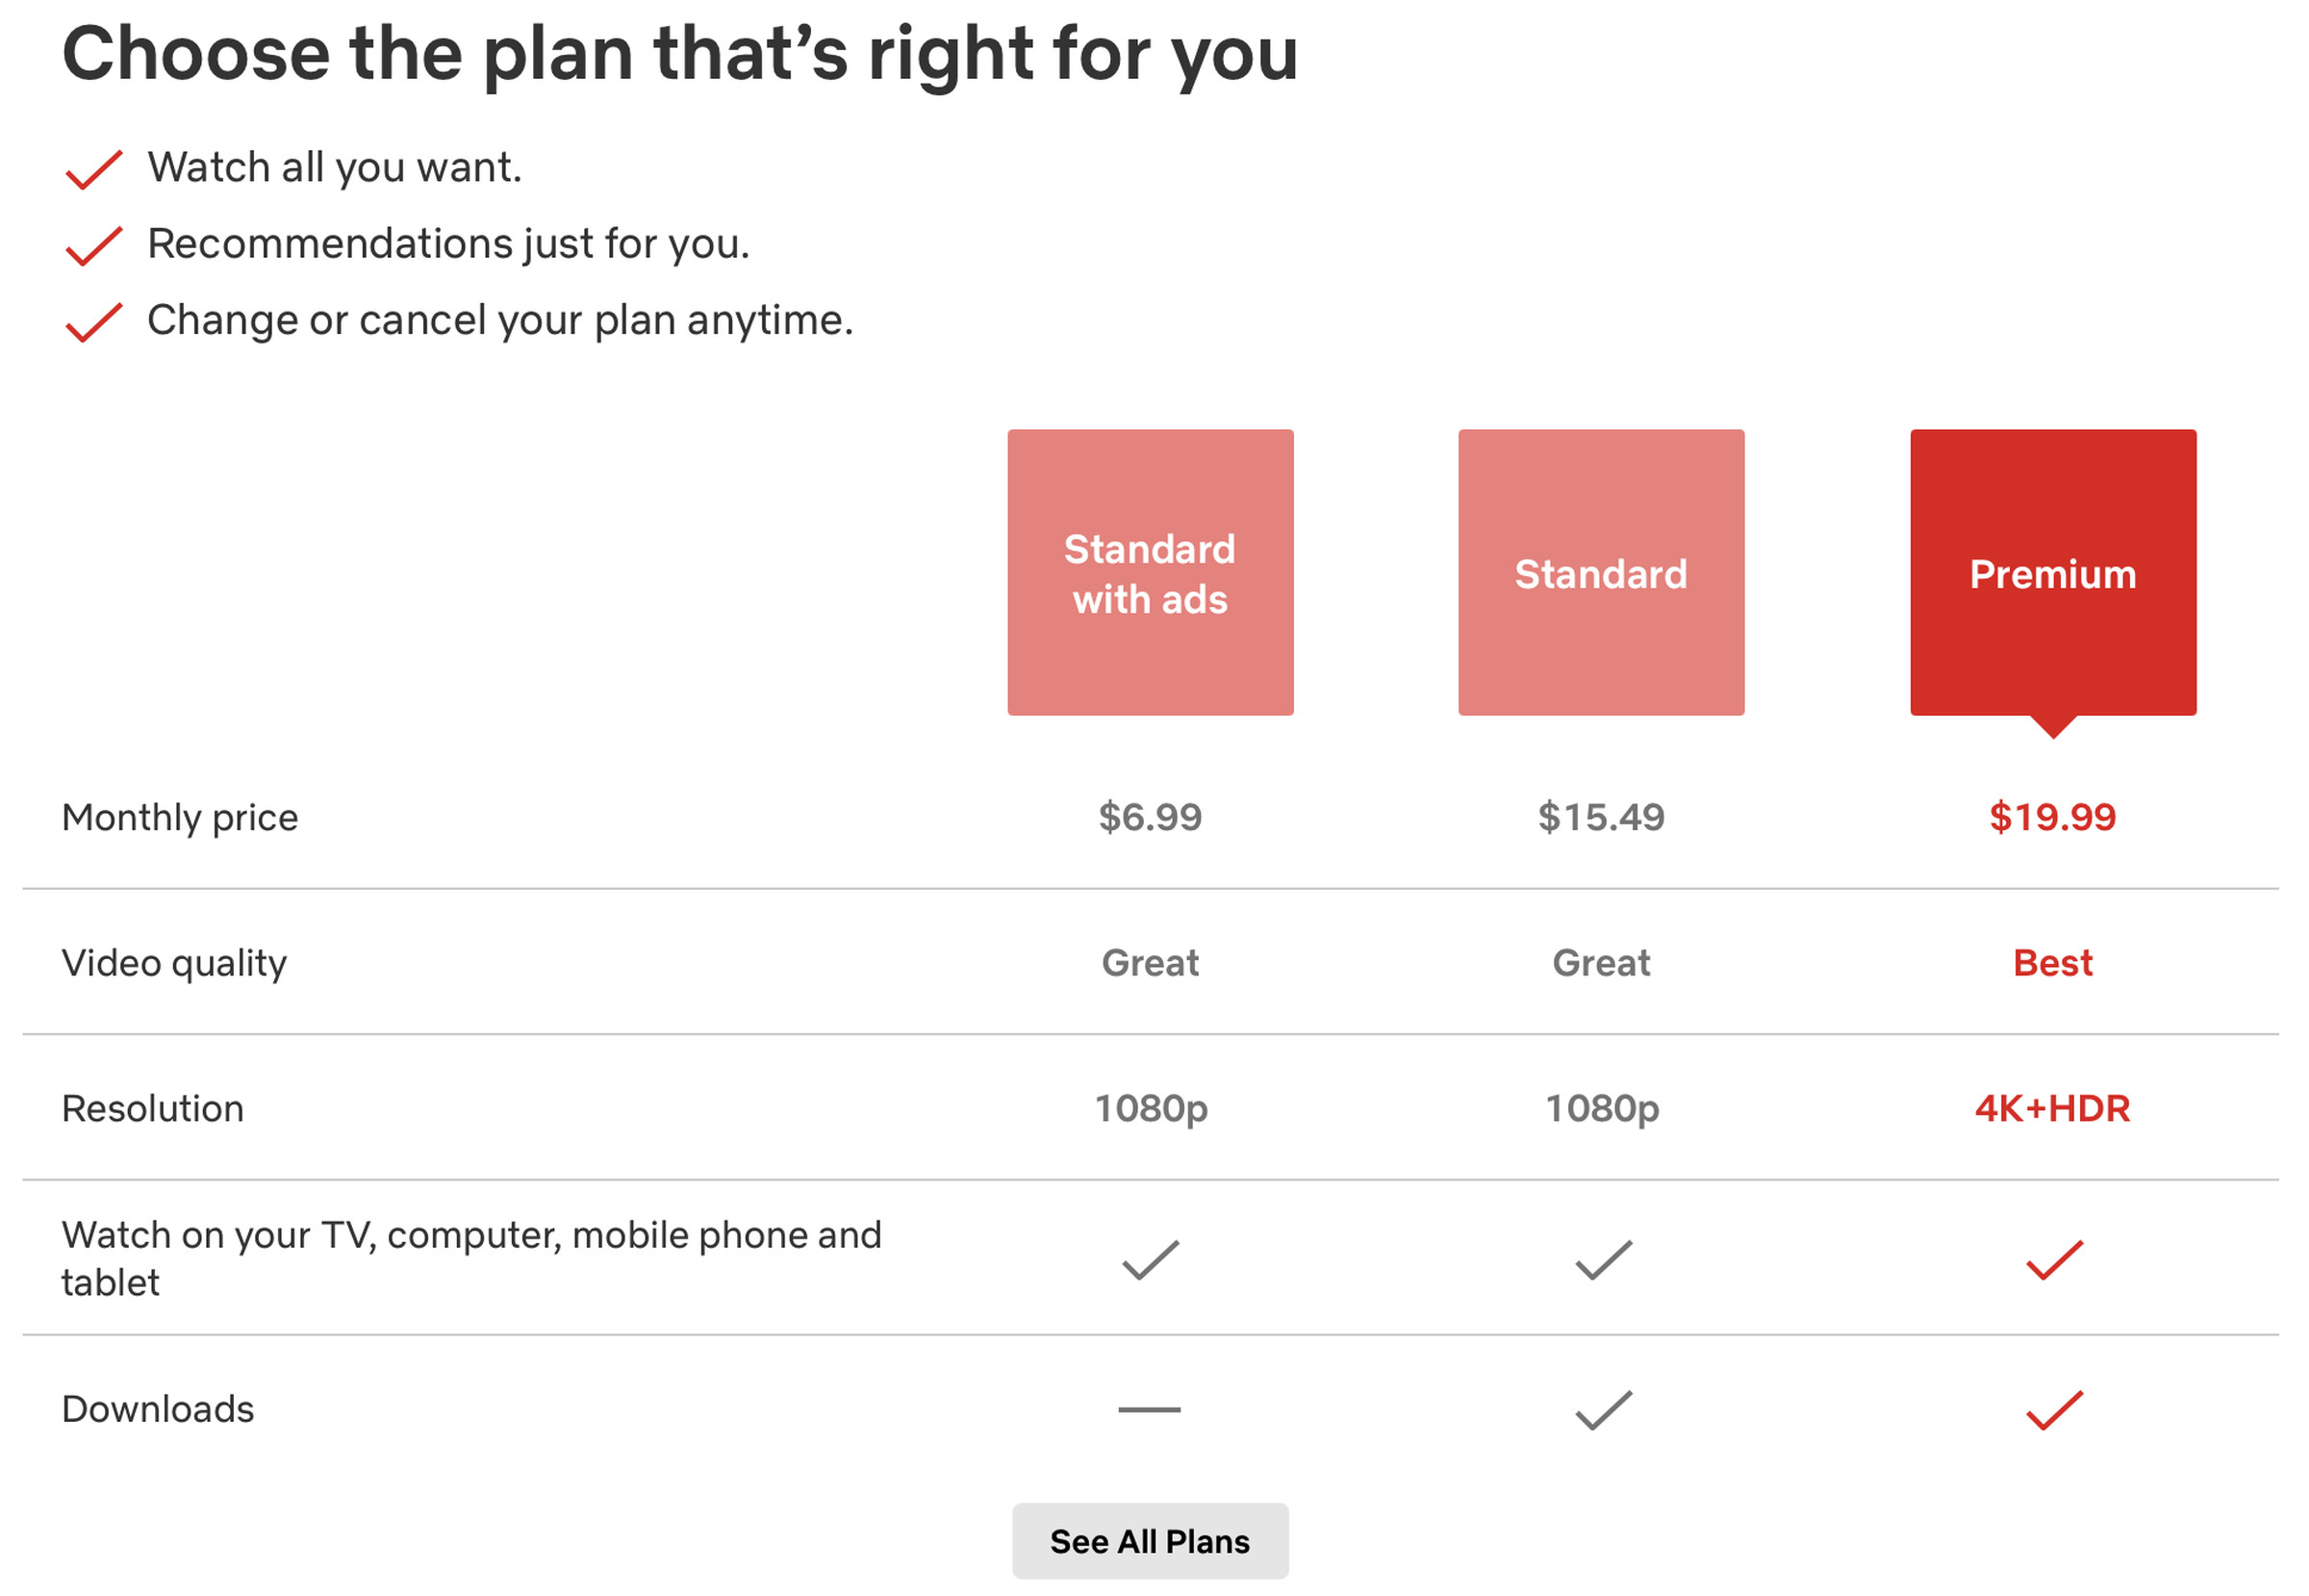 You have to hit the “See All Plans” button for the basic plan to show up when signing up for a new account in the US.